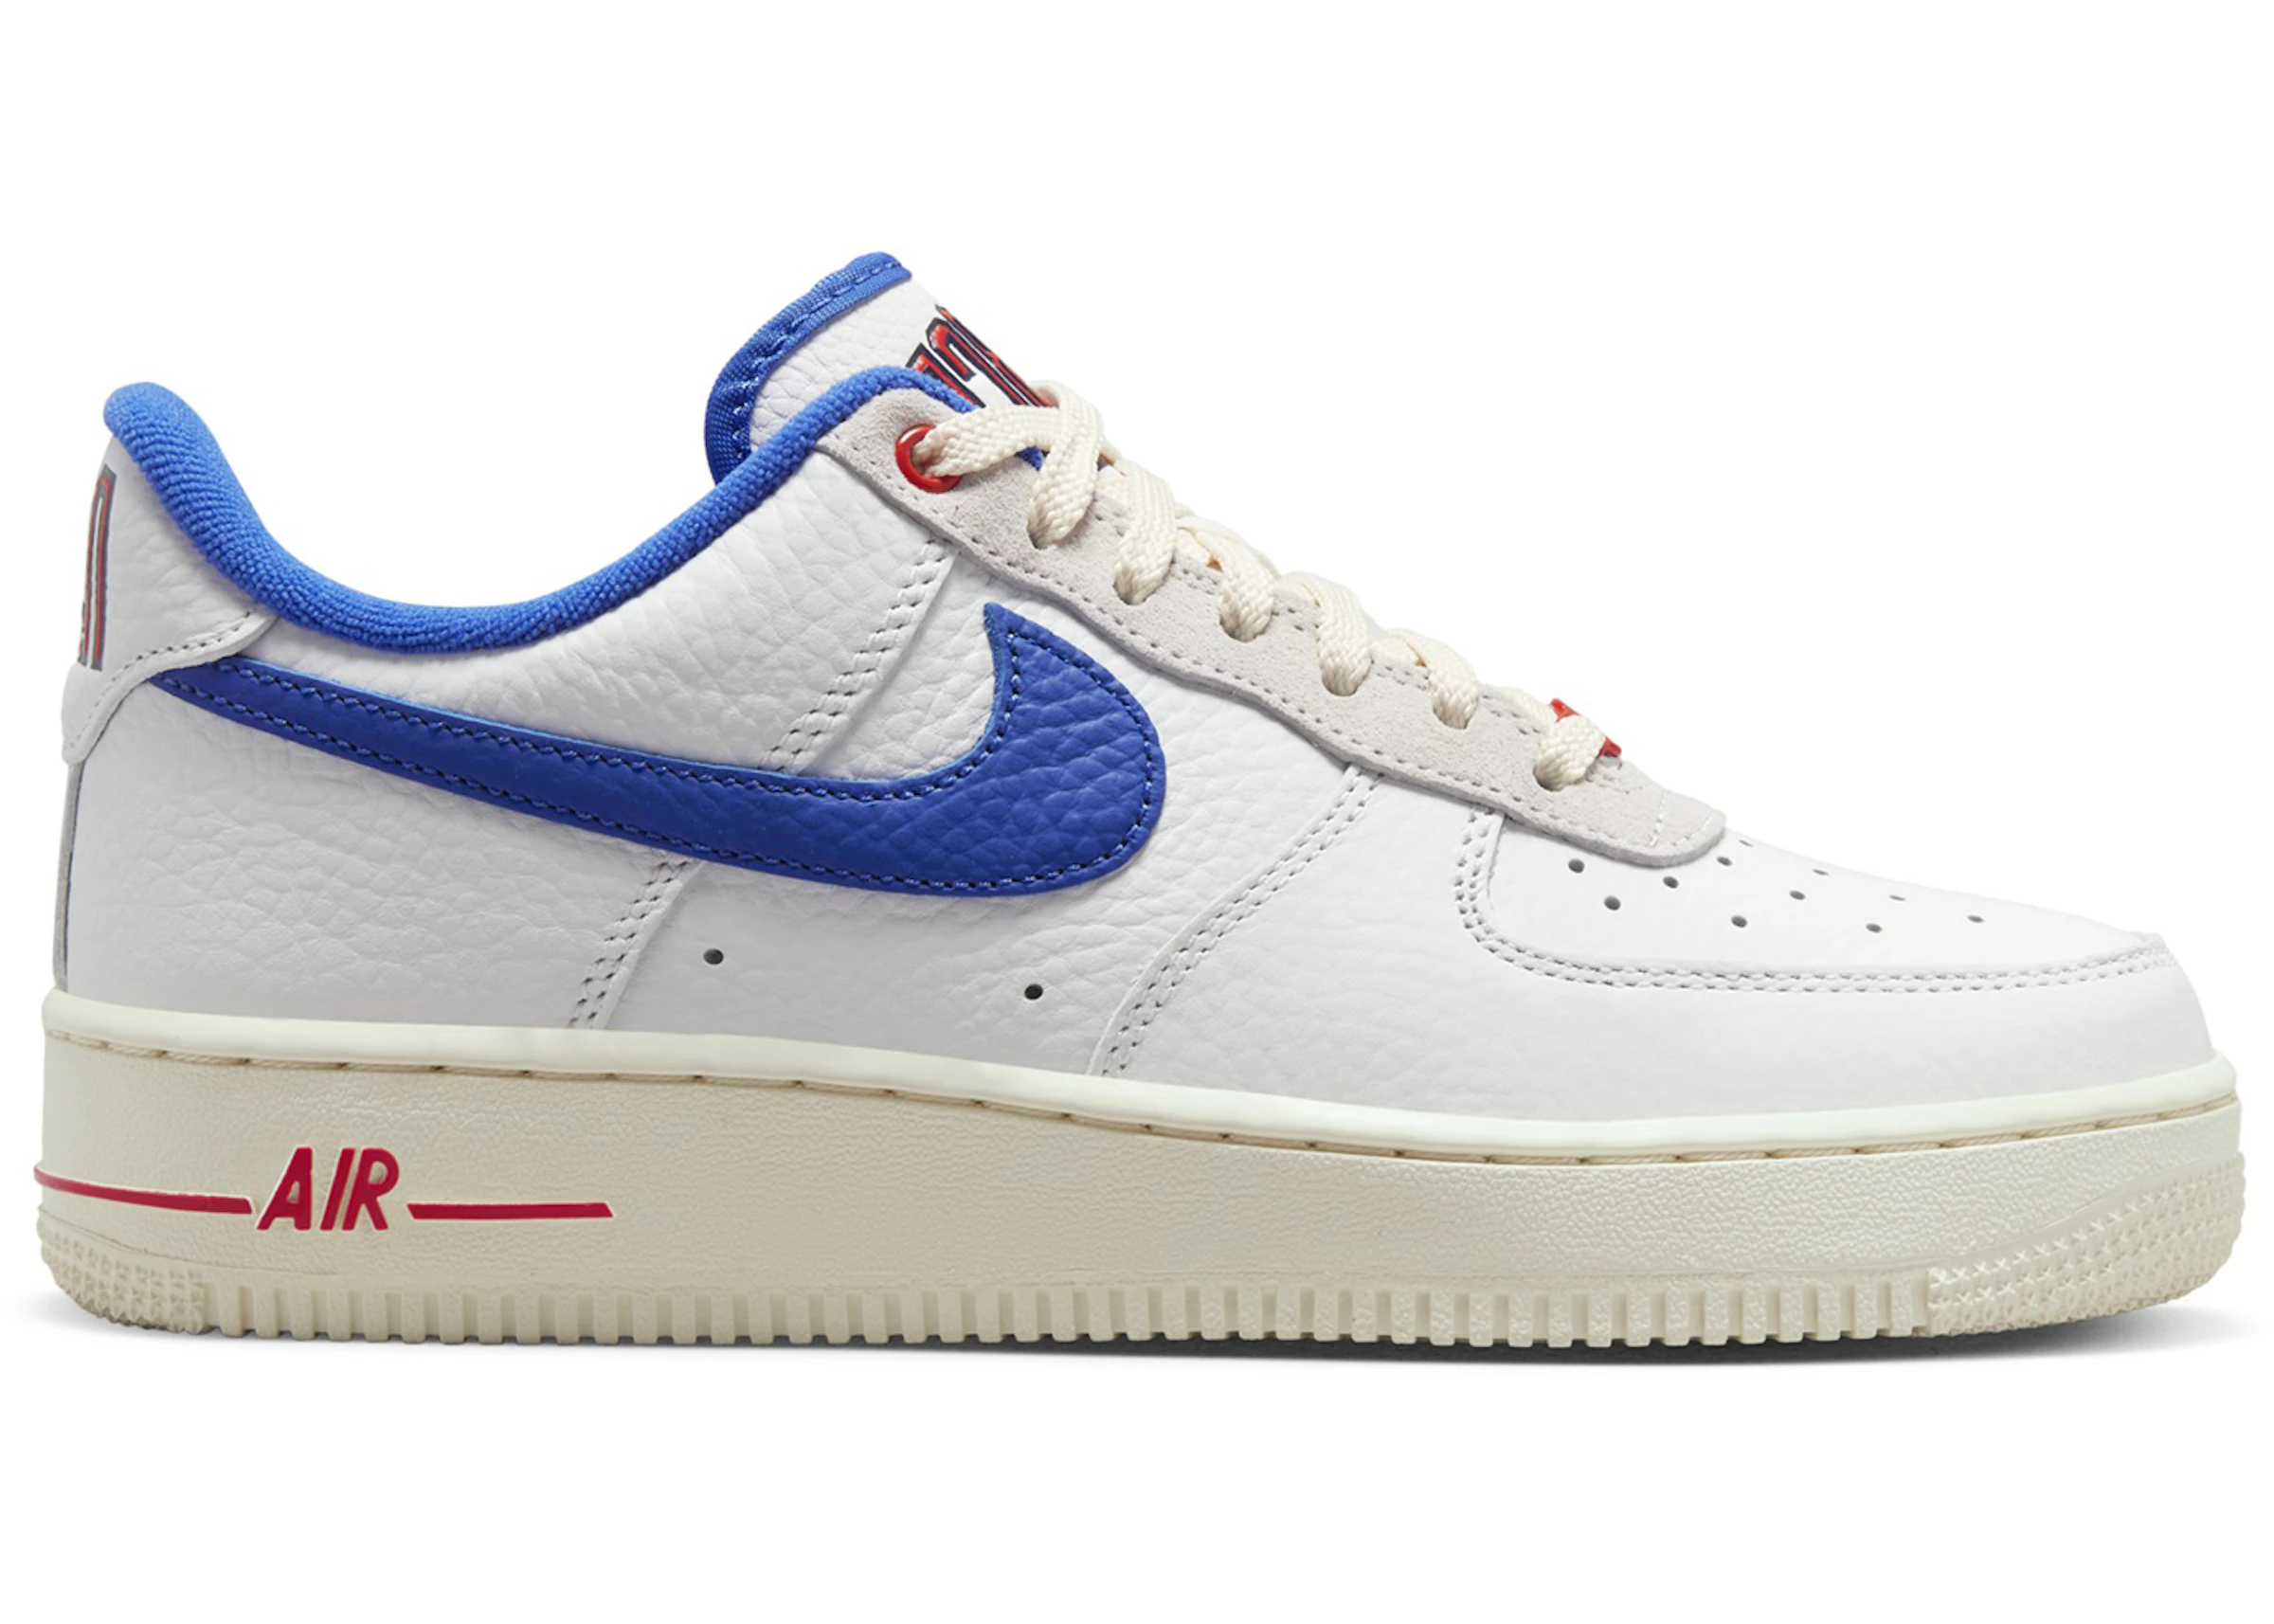 Afm Andere plaatsen oogst Nike Air Force 1 Low '07 LX Command Force University Blue Summit White  (Women's) - DR0148-100 - US